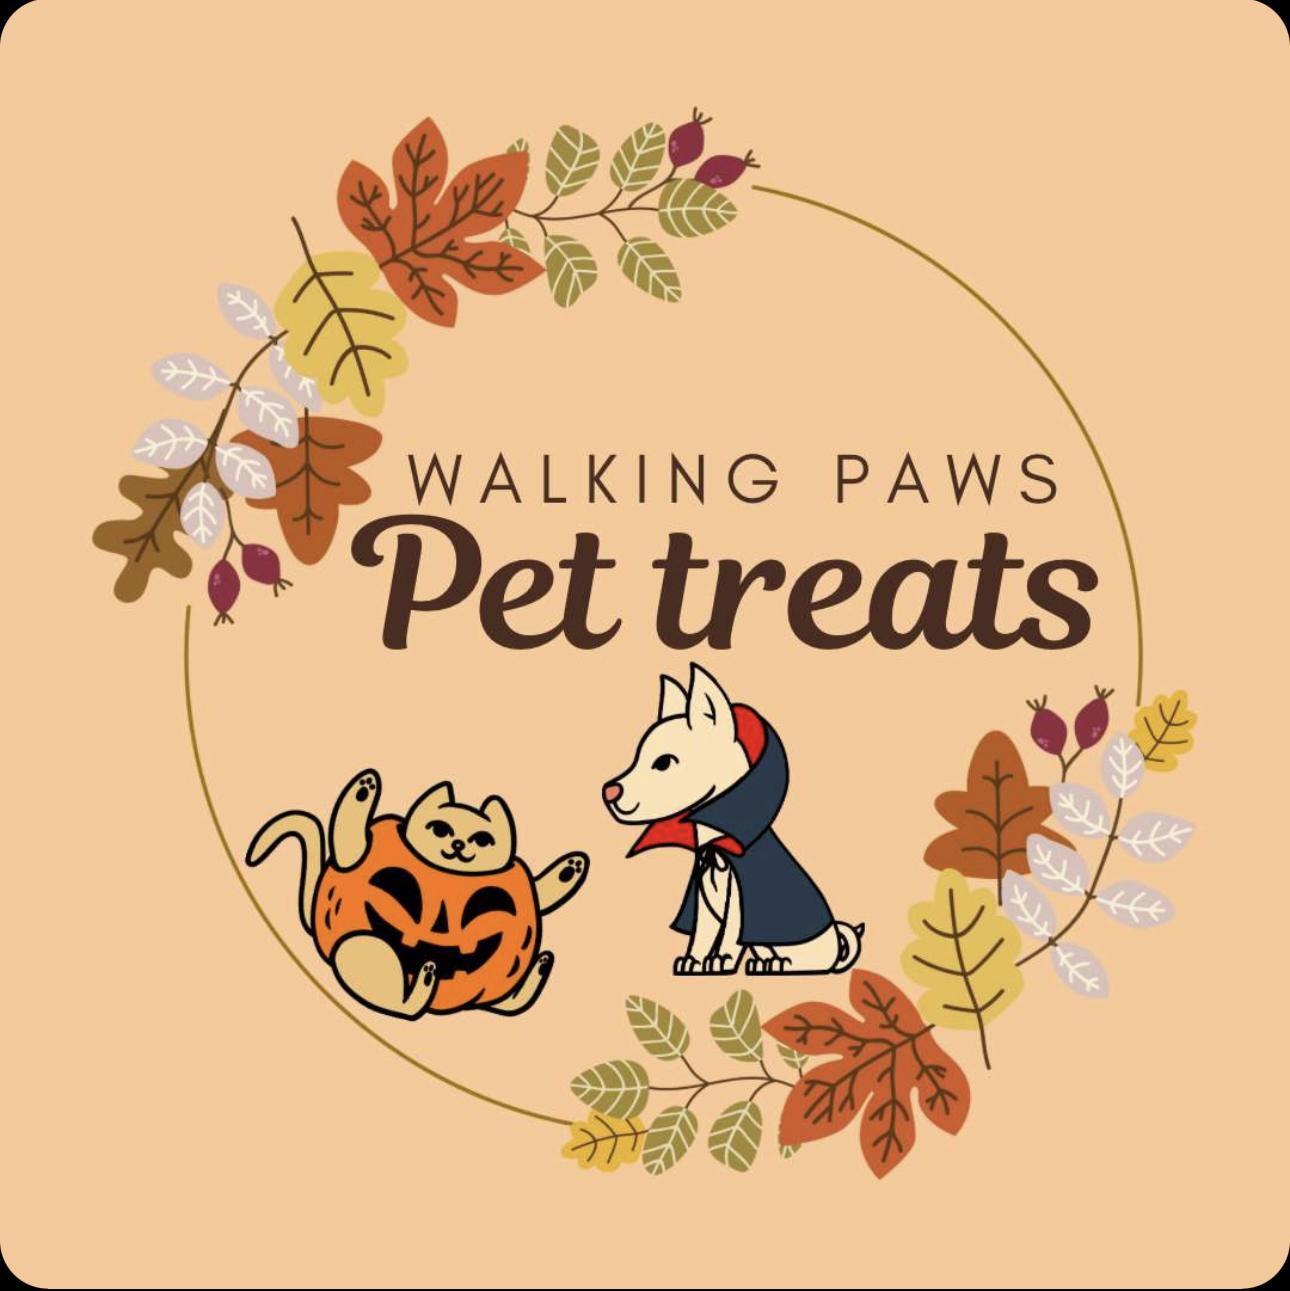 Walking paws 's images